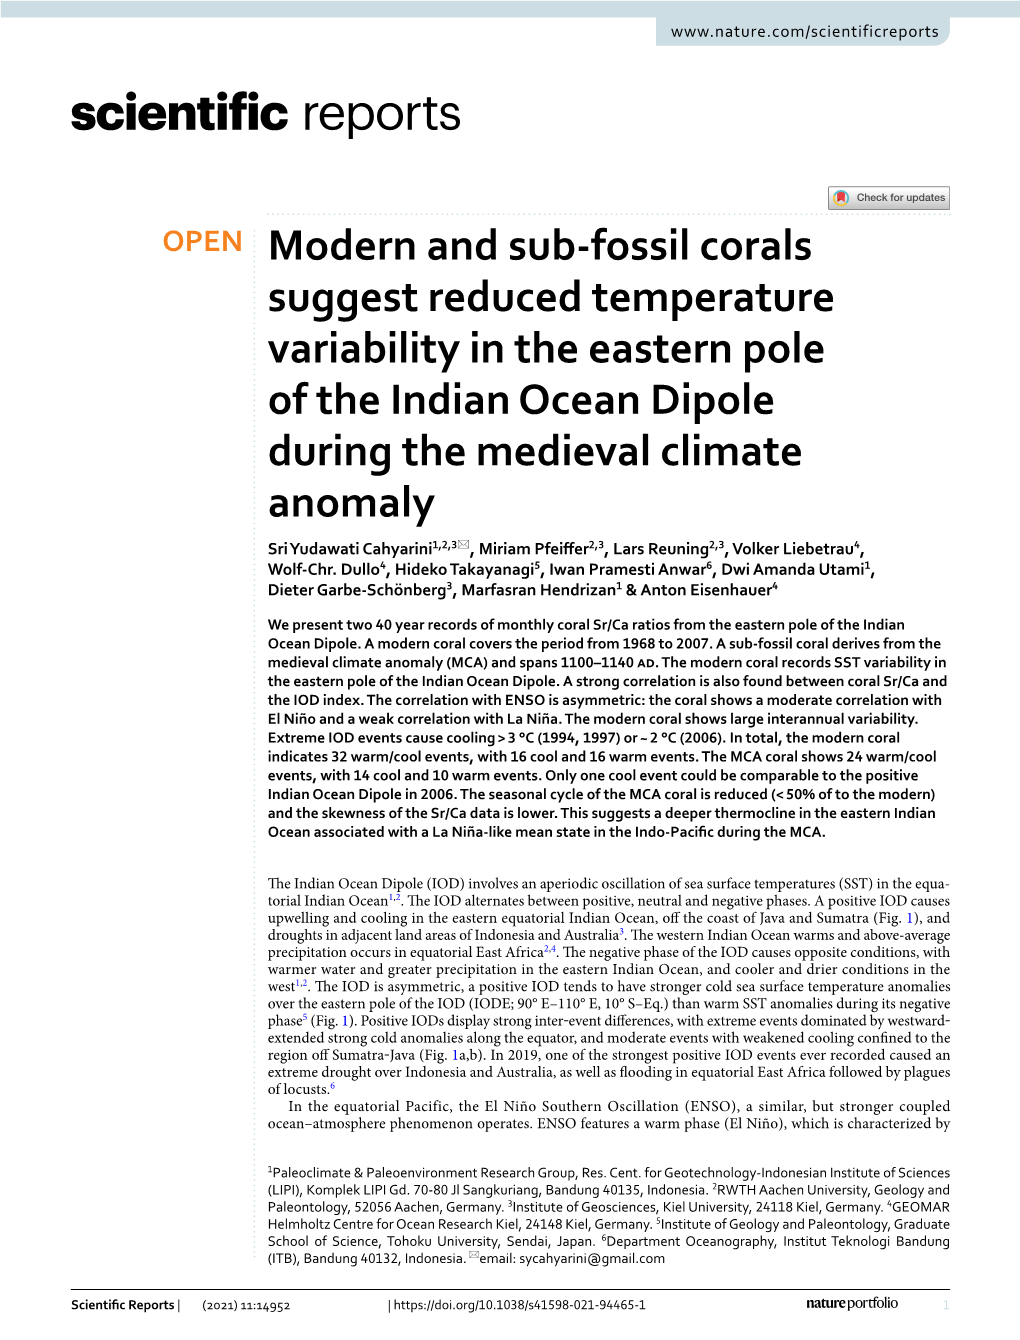 Modern and Sub-Fossil Corals Suggest Reduced Temperature Variability In